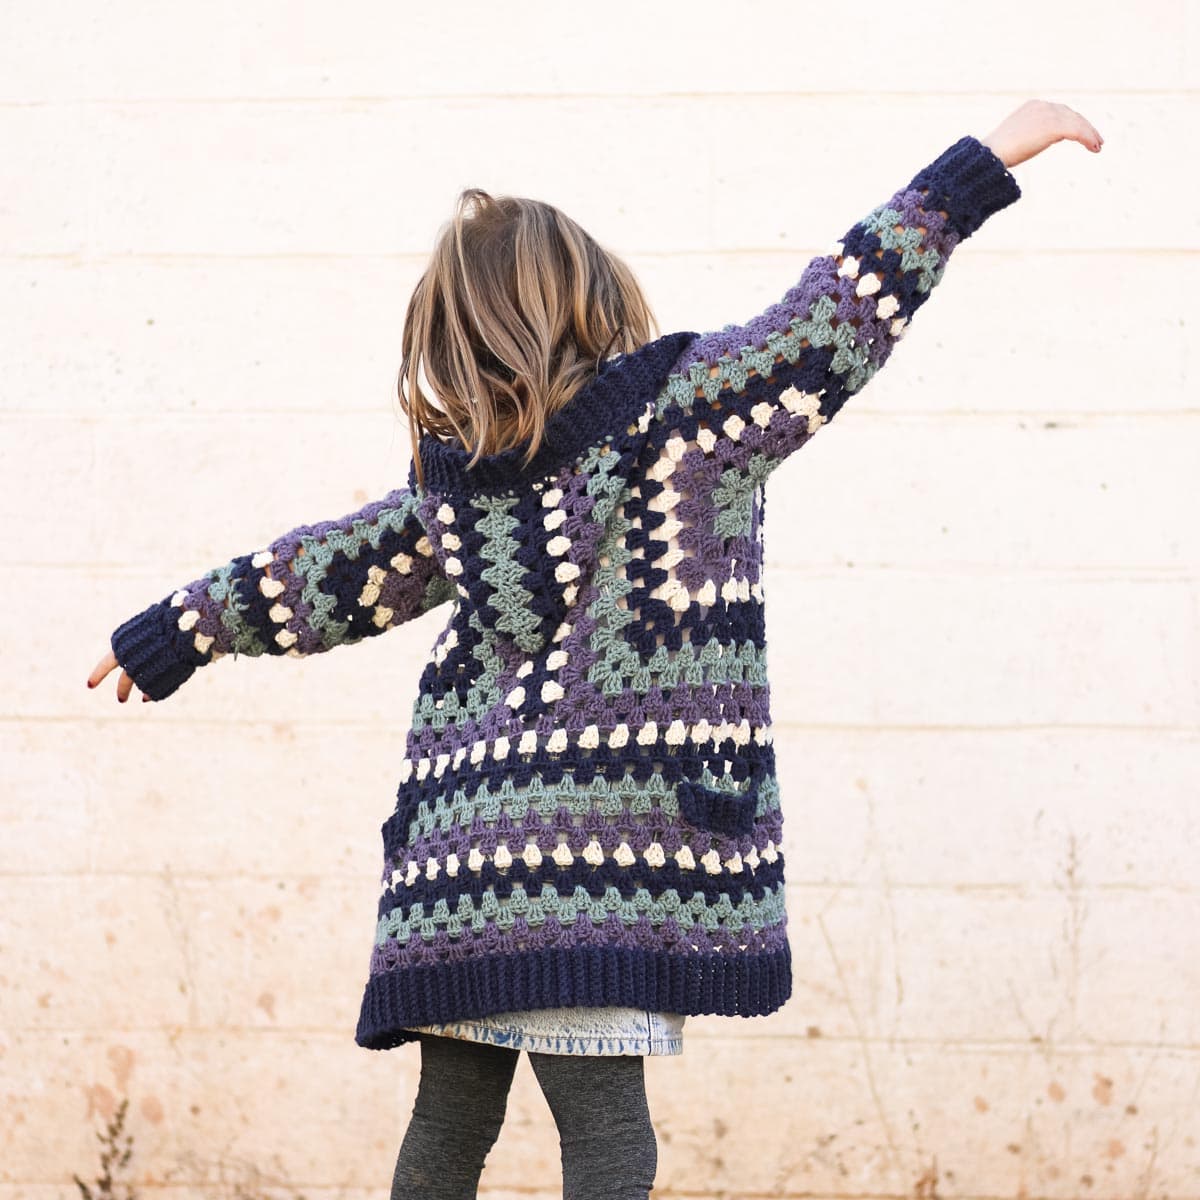 Child with back to camera wearing a granny stitch hexagon cardigan.